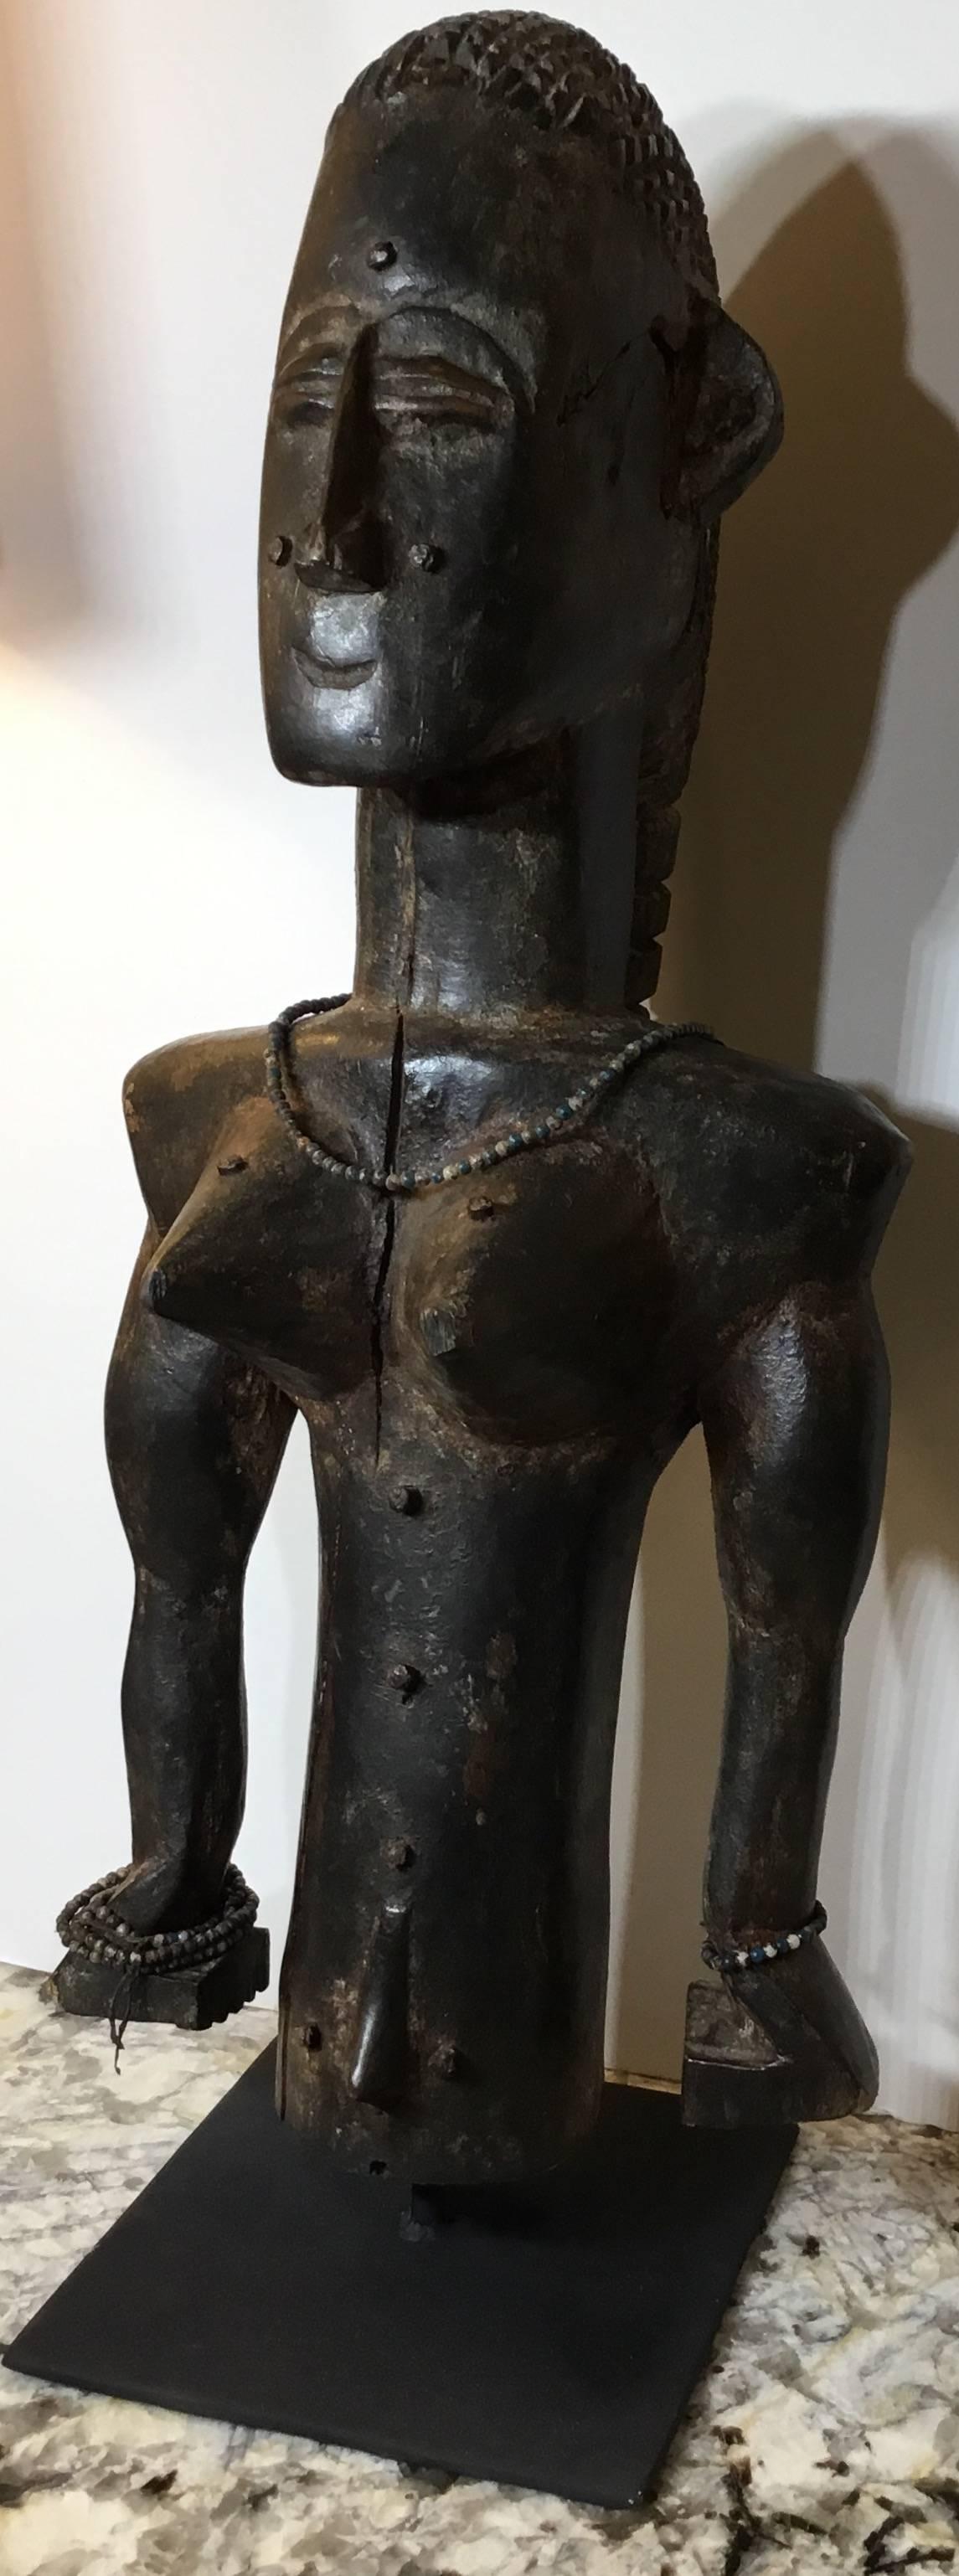 Unknown Male Warrior Figure from the Ivory Coast